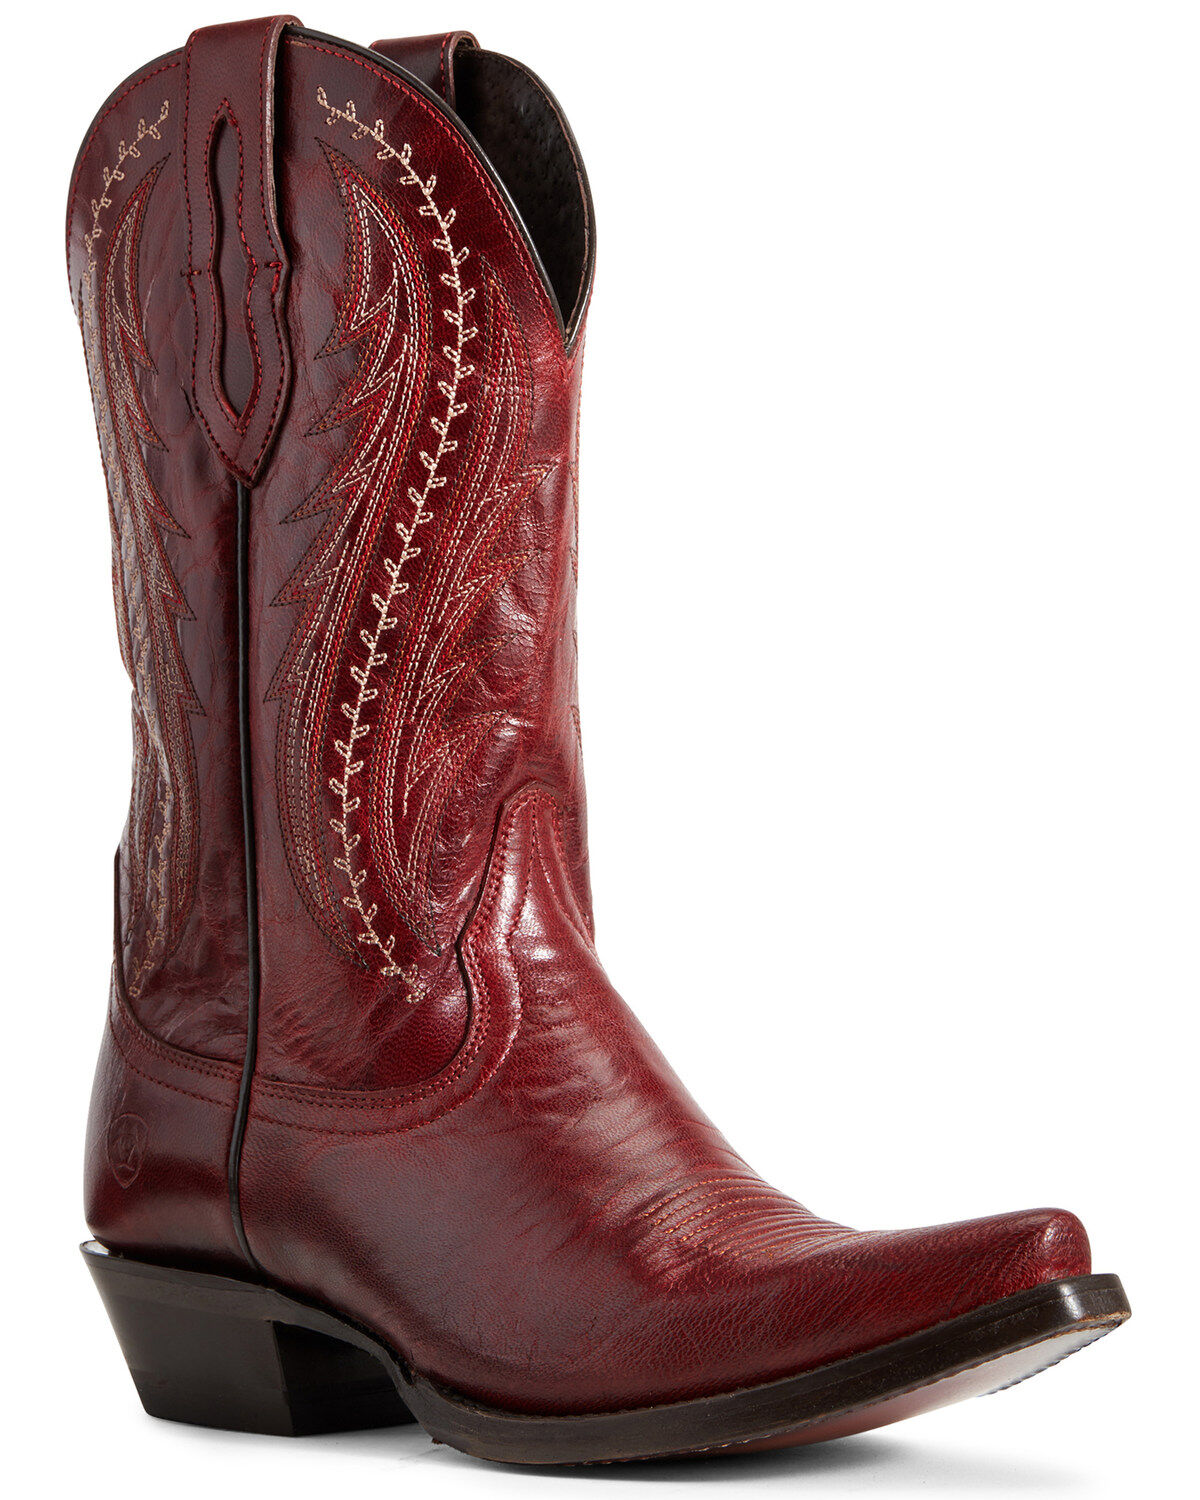 women's roper boots clearance